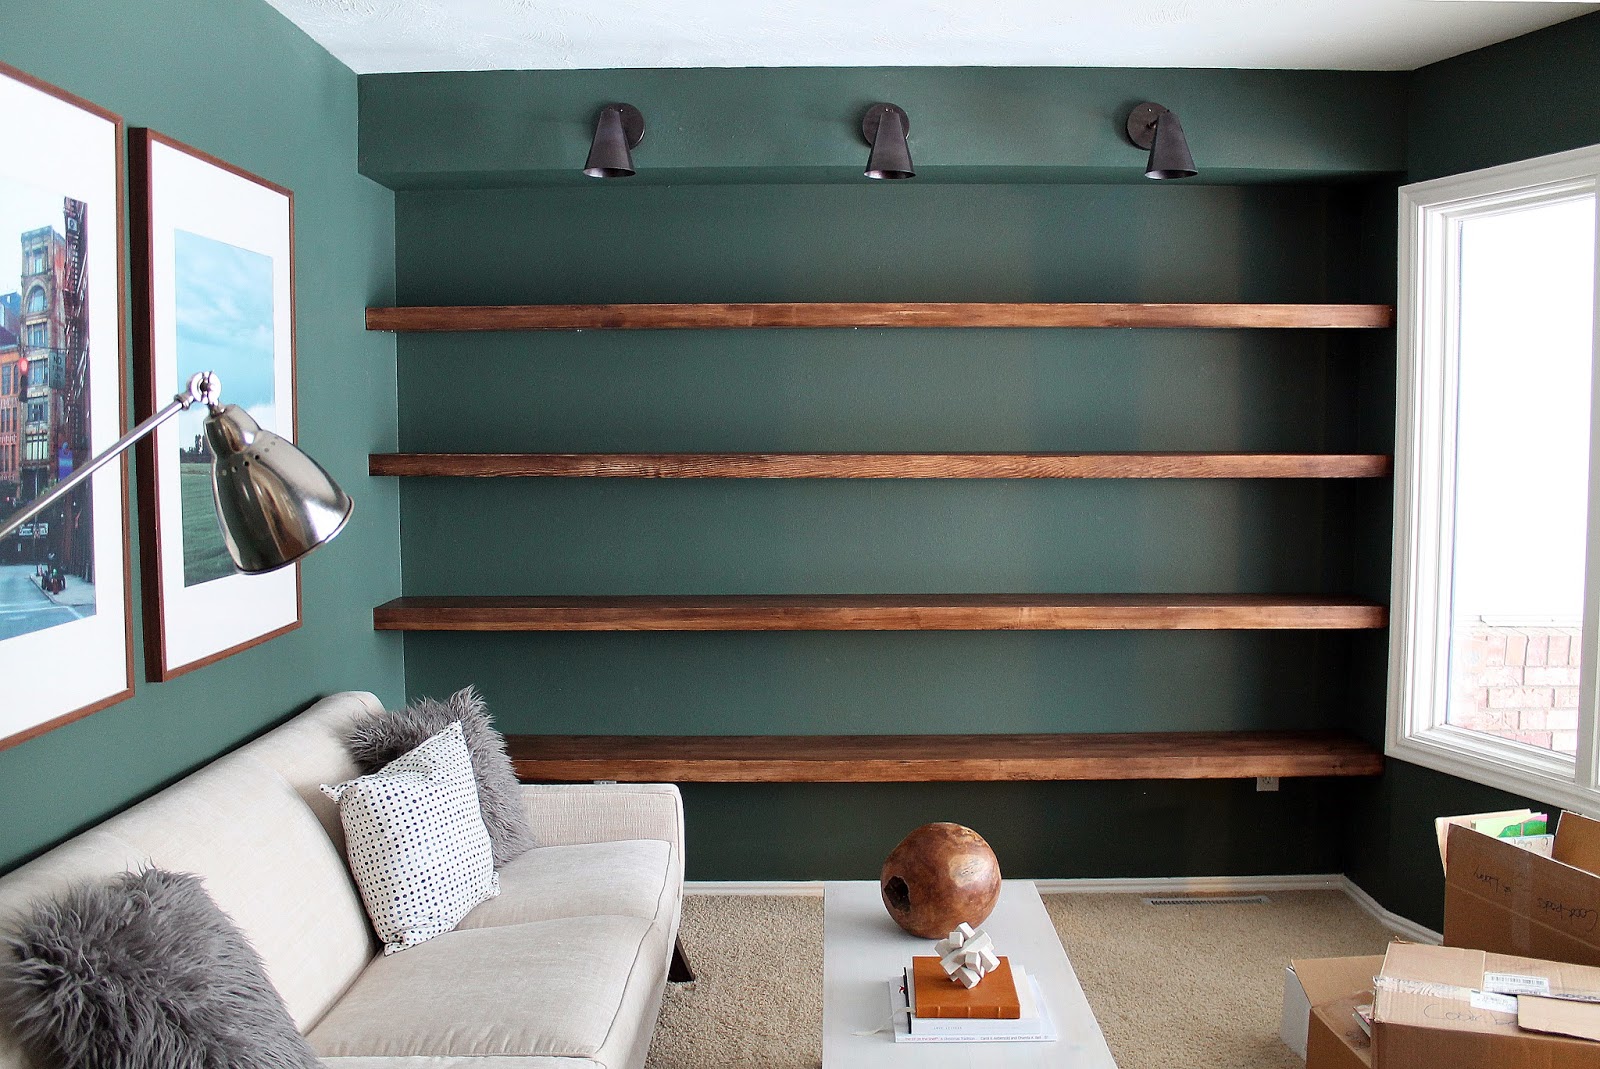 Diy Solid Wood Wall To Shelves, Do It Yourself Shelves For Living Room